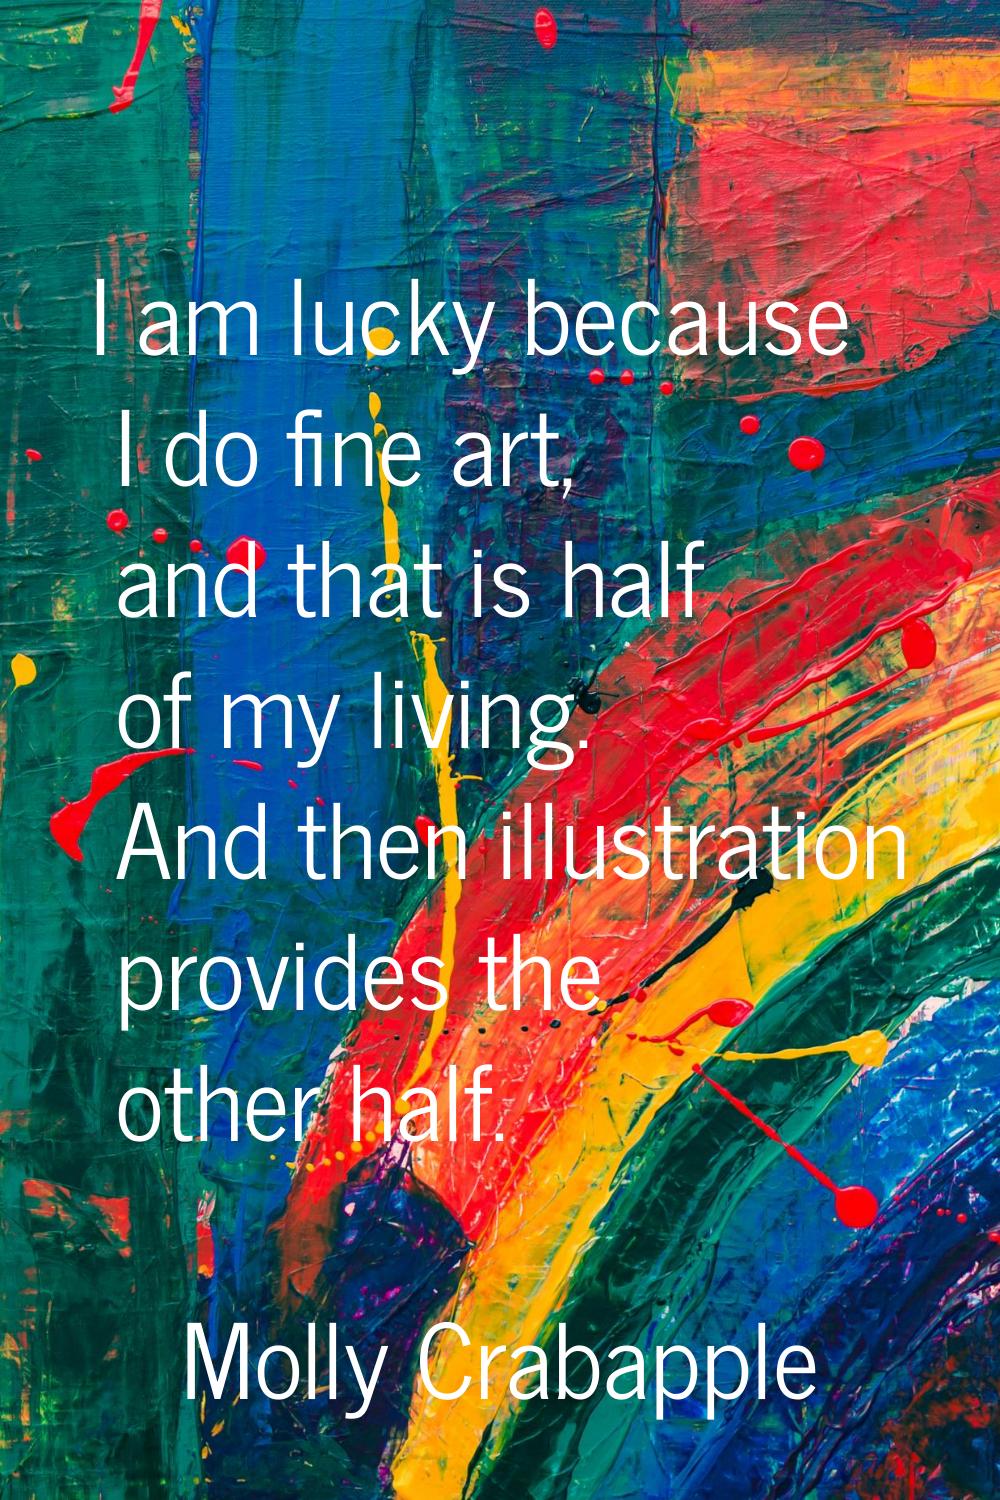 I am lucky because I do fine art, and that is half of my living. And then illustration provides the